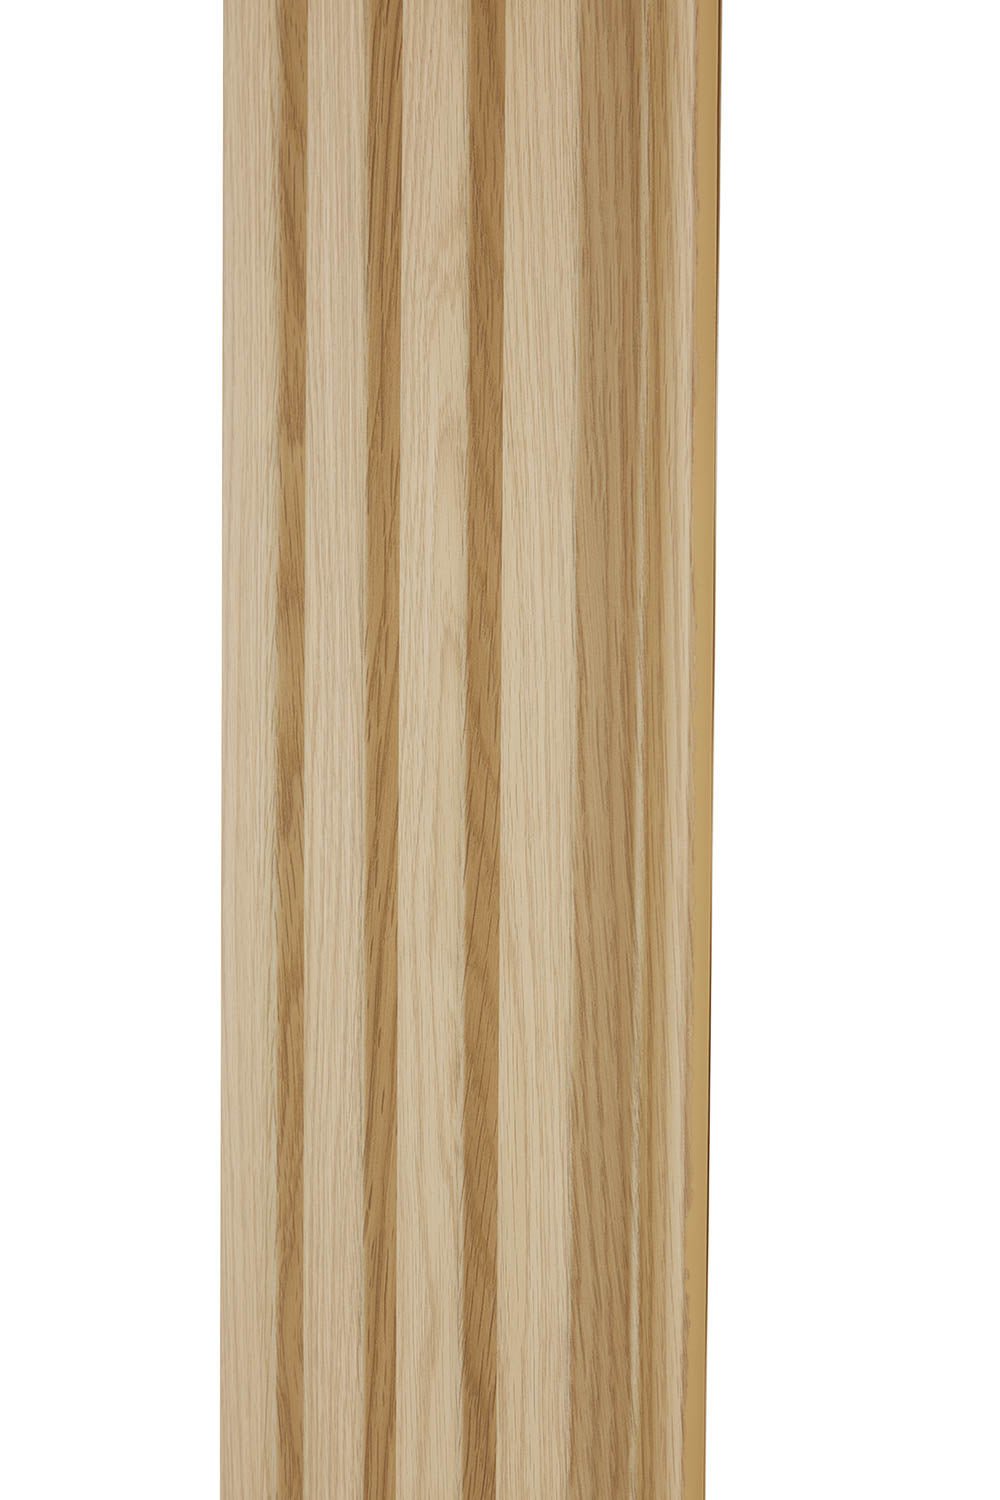 Image showing close up of tongue edging of a natural oak waterproof panel